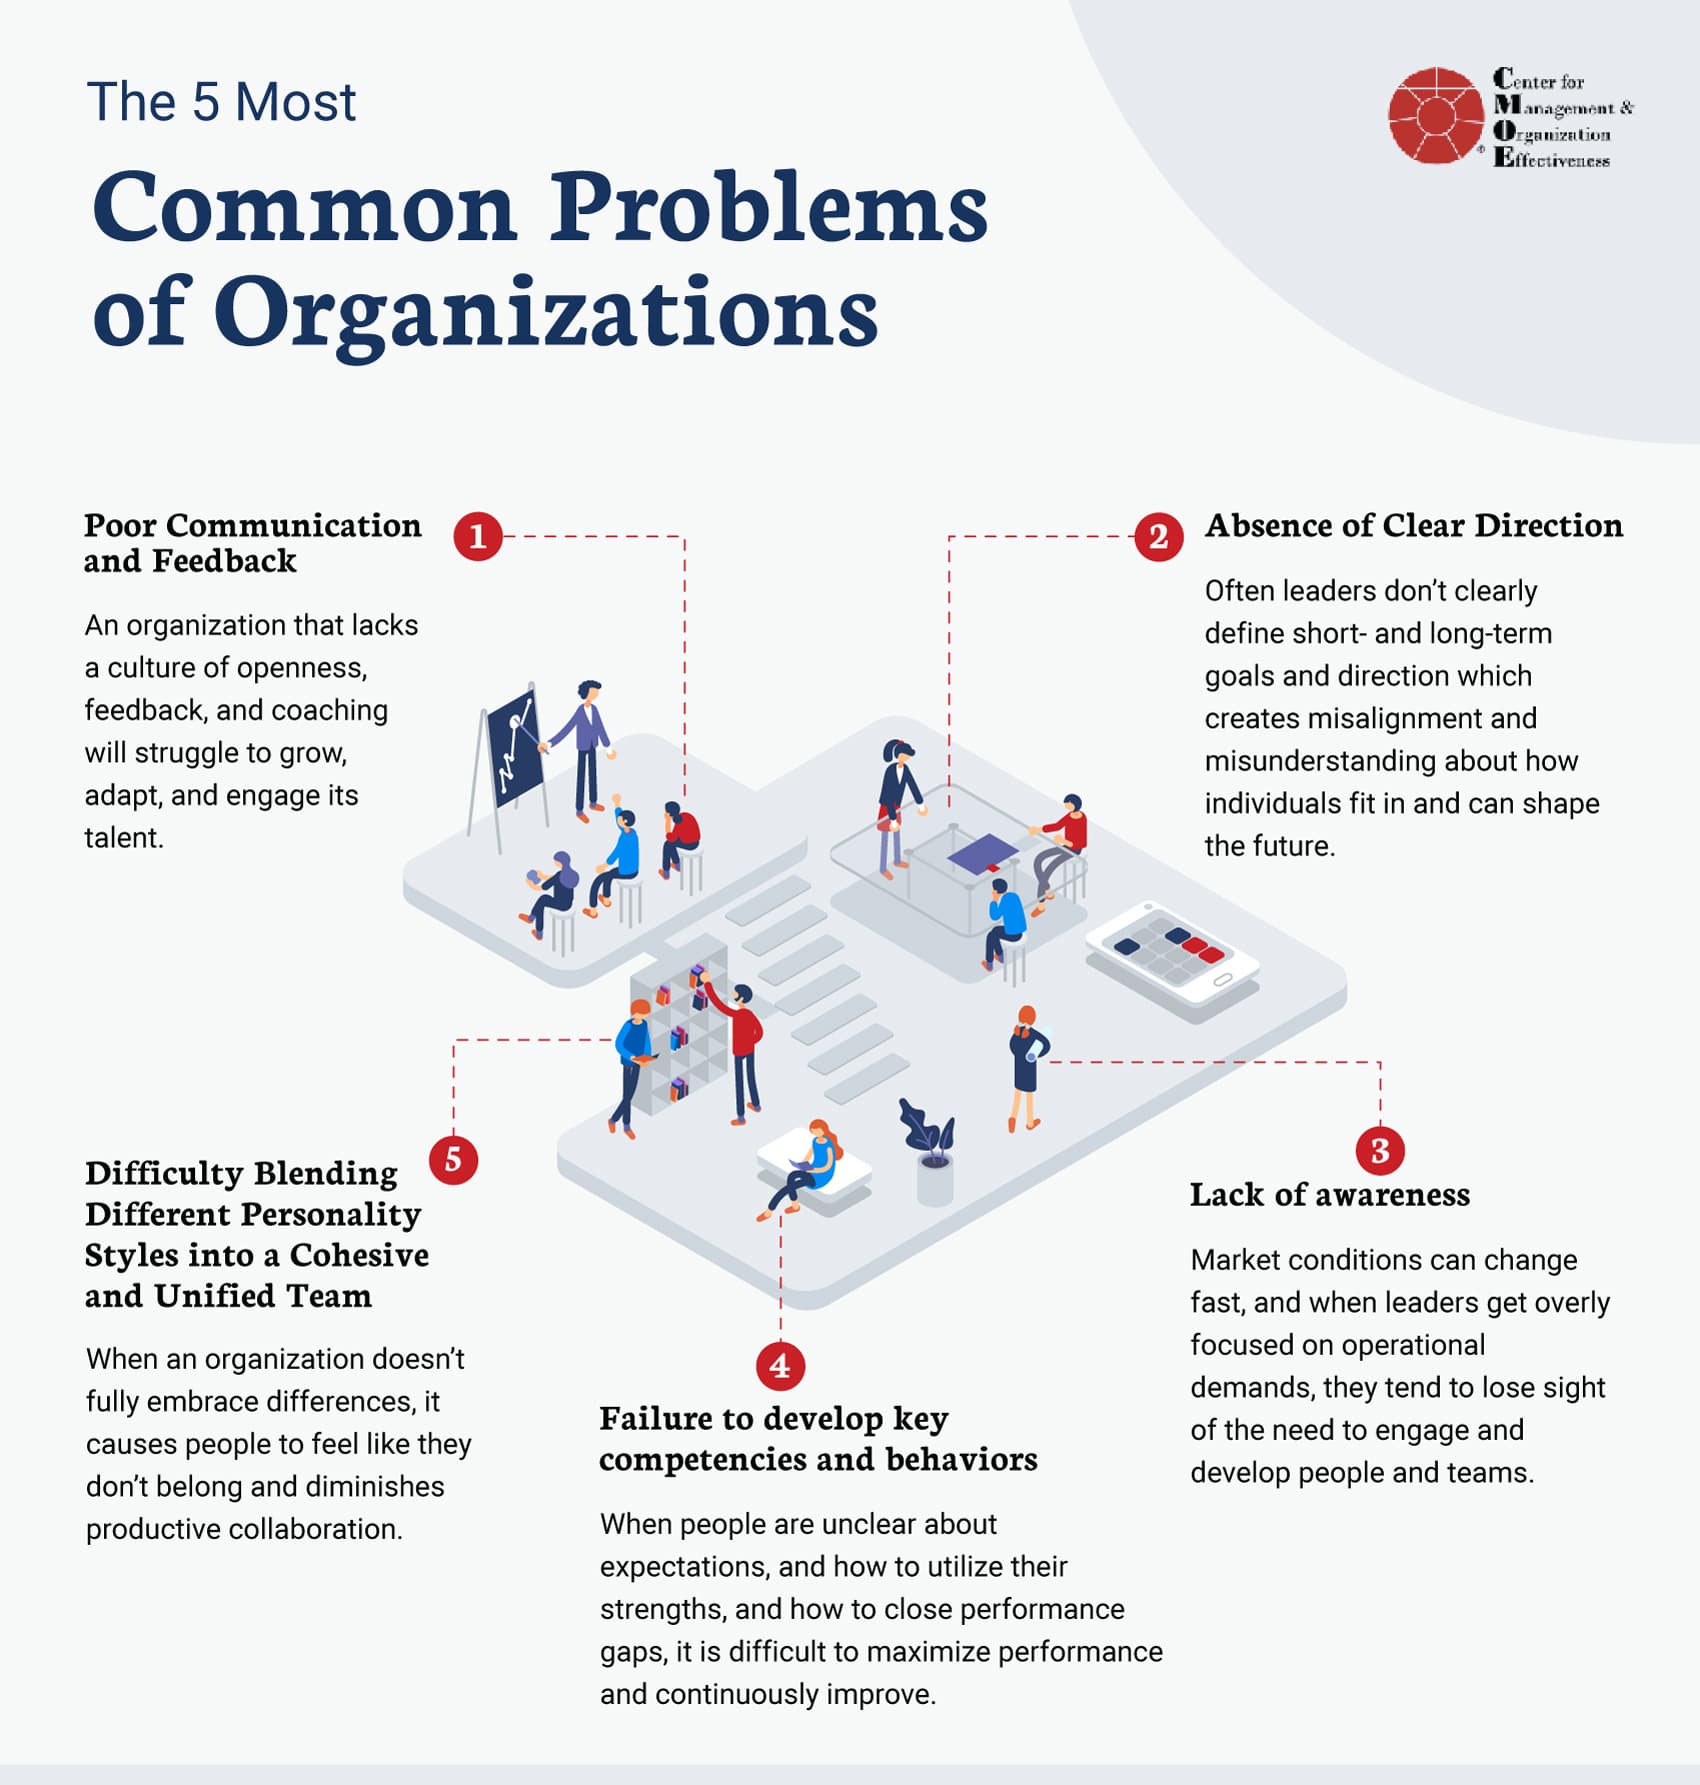 causes of conflict in an organisation